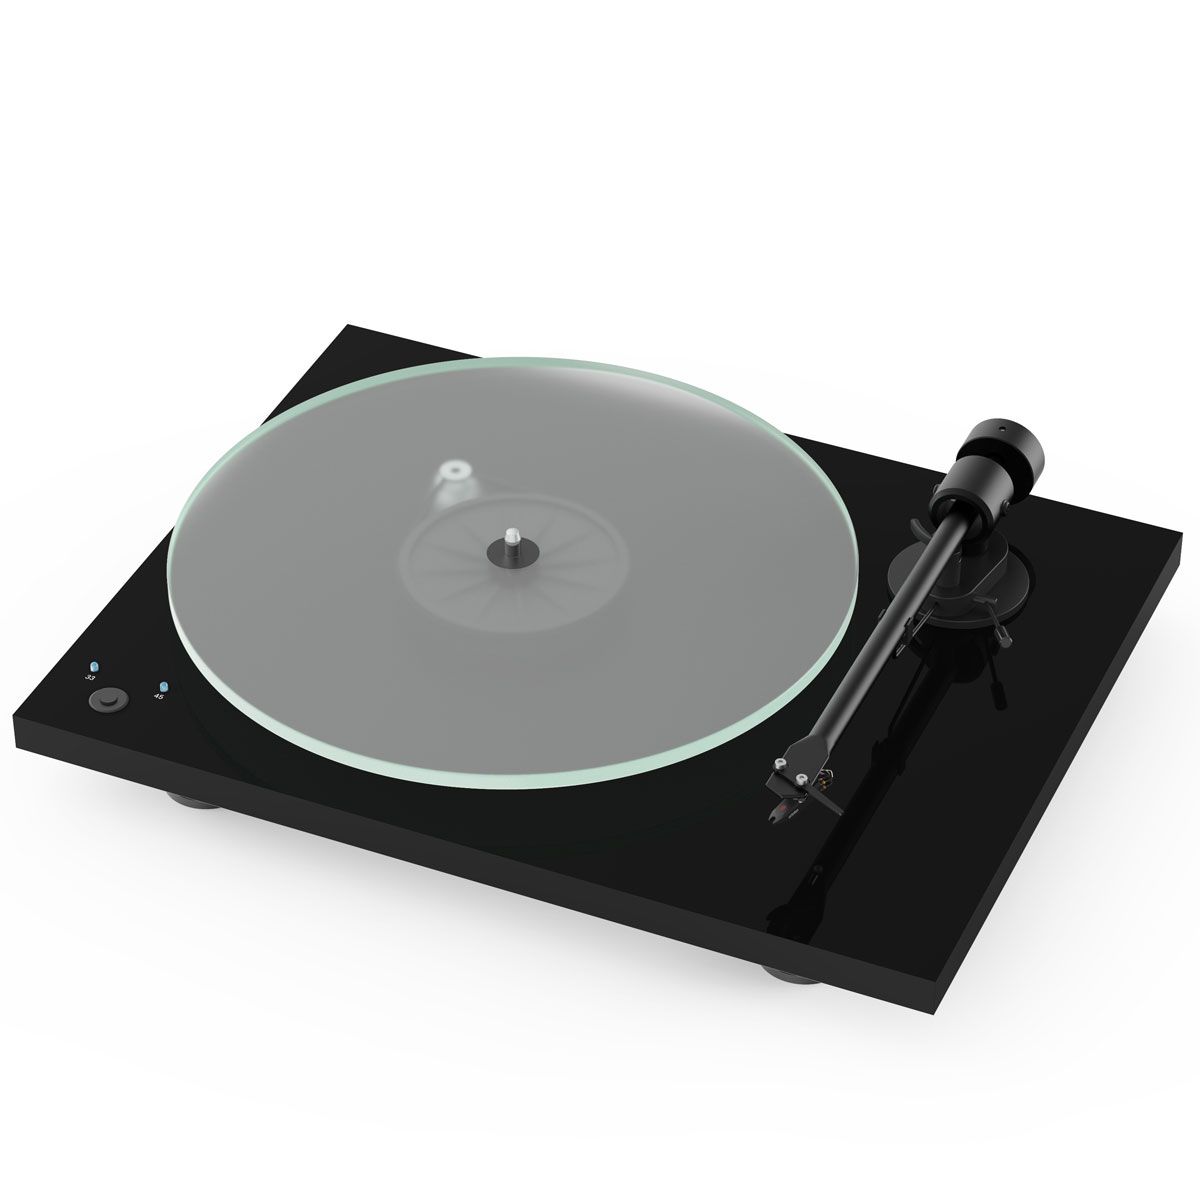 Pro-Ject T1 Phono SB Turntable - angled front view with acrylic platter